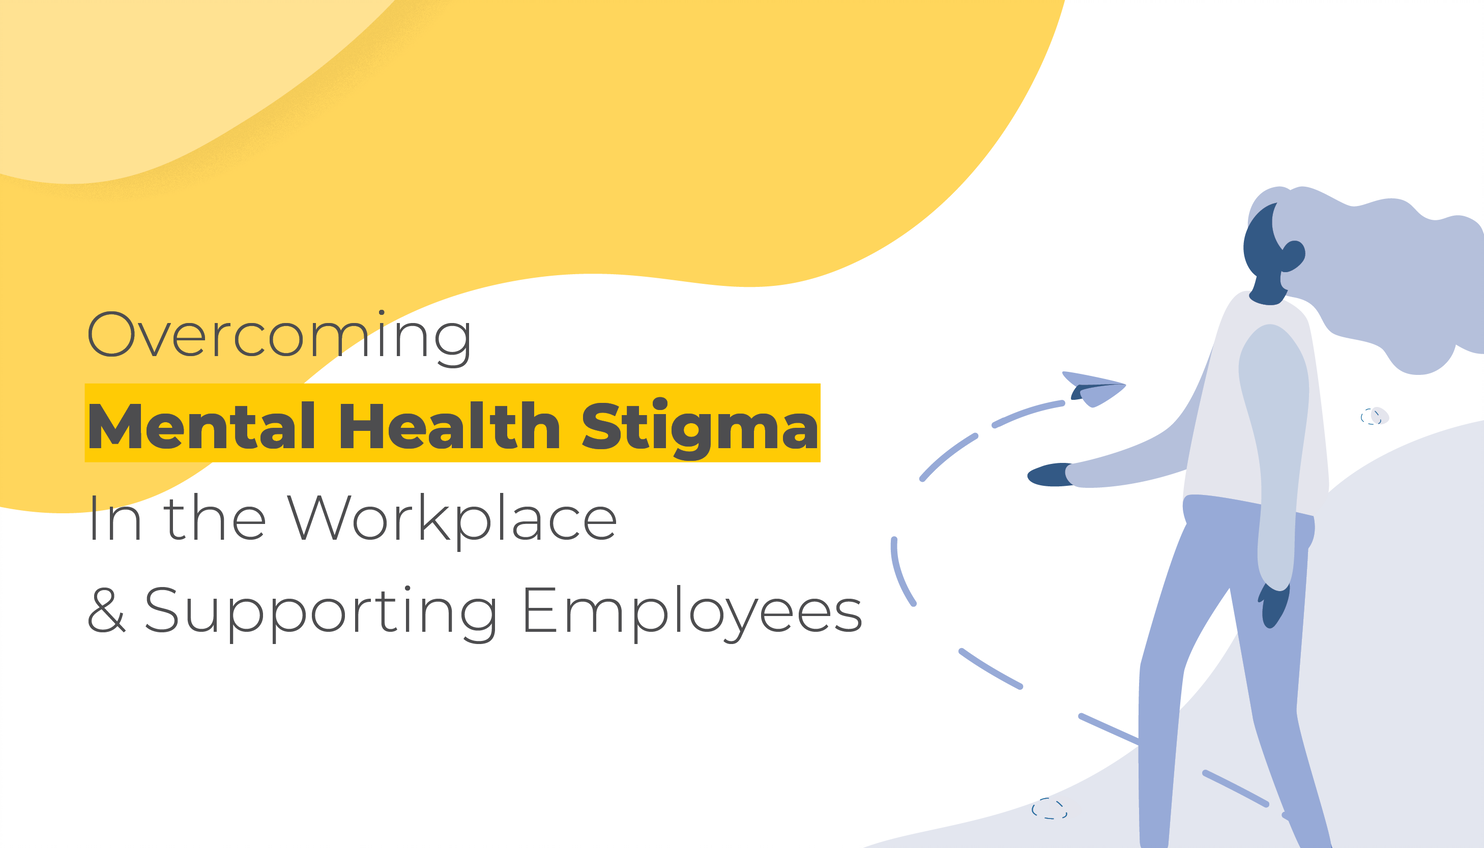 Overcoming Mental Health Stigma in the Workplace & Supporting Employees | Benefits by Design